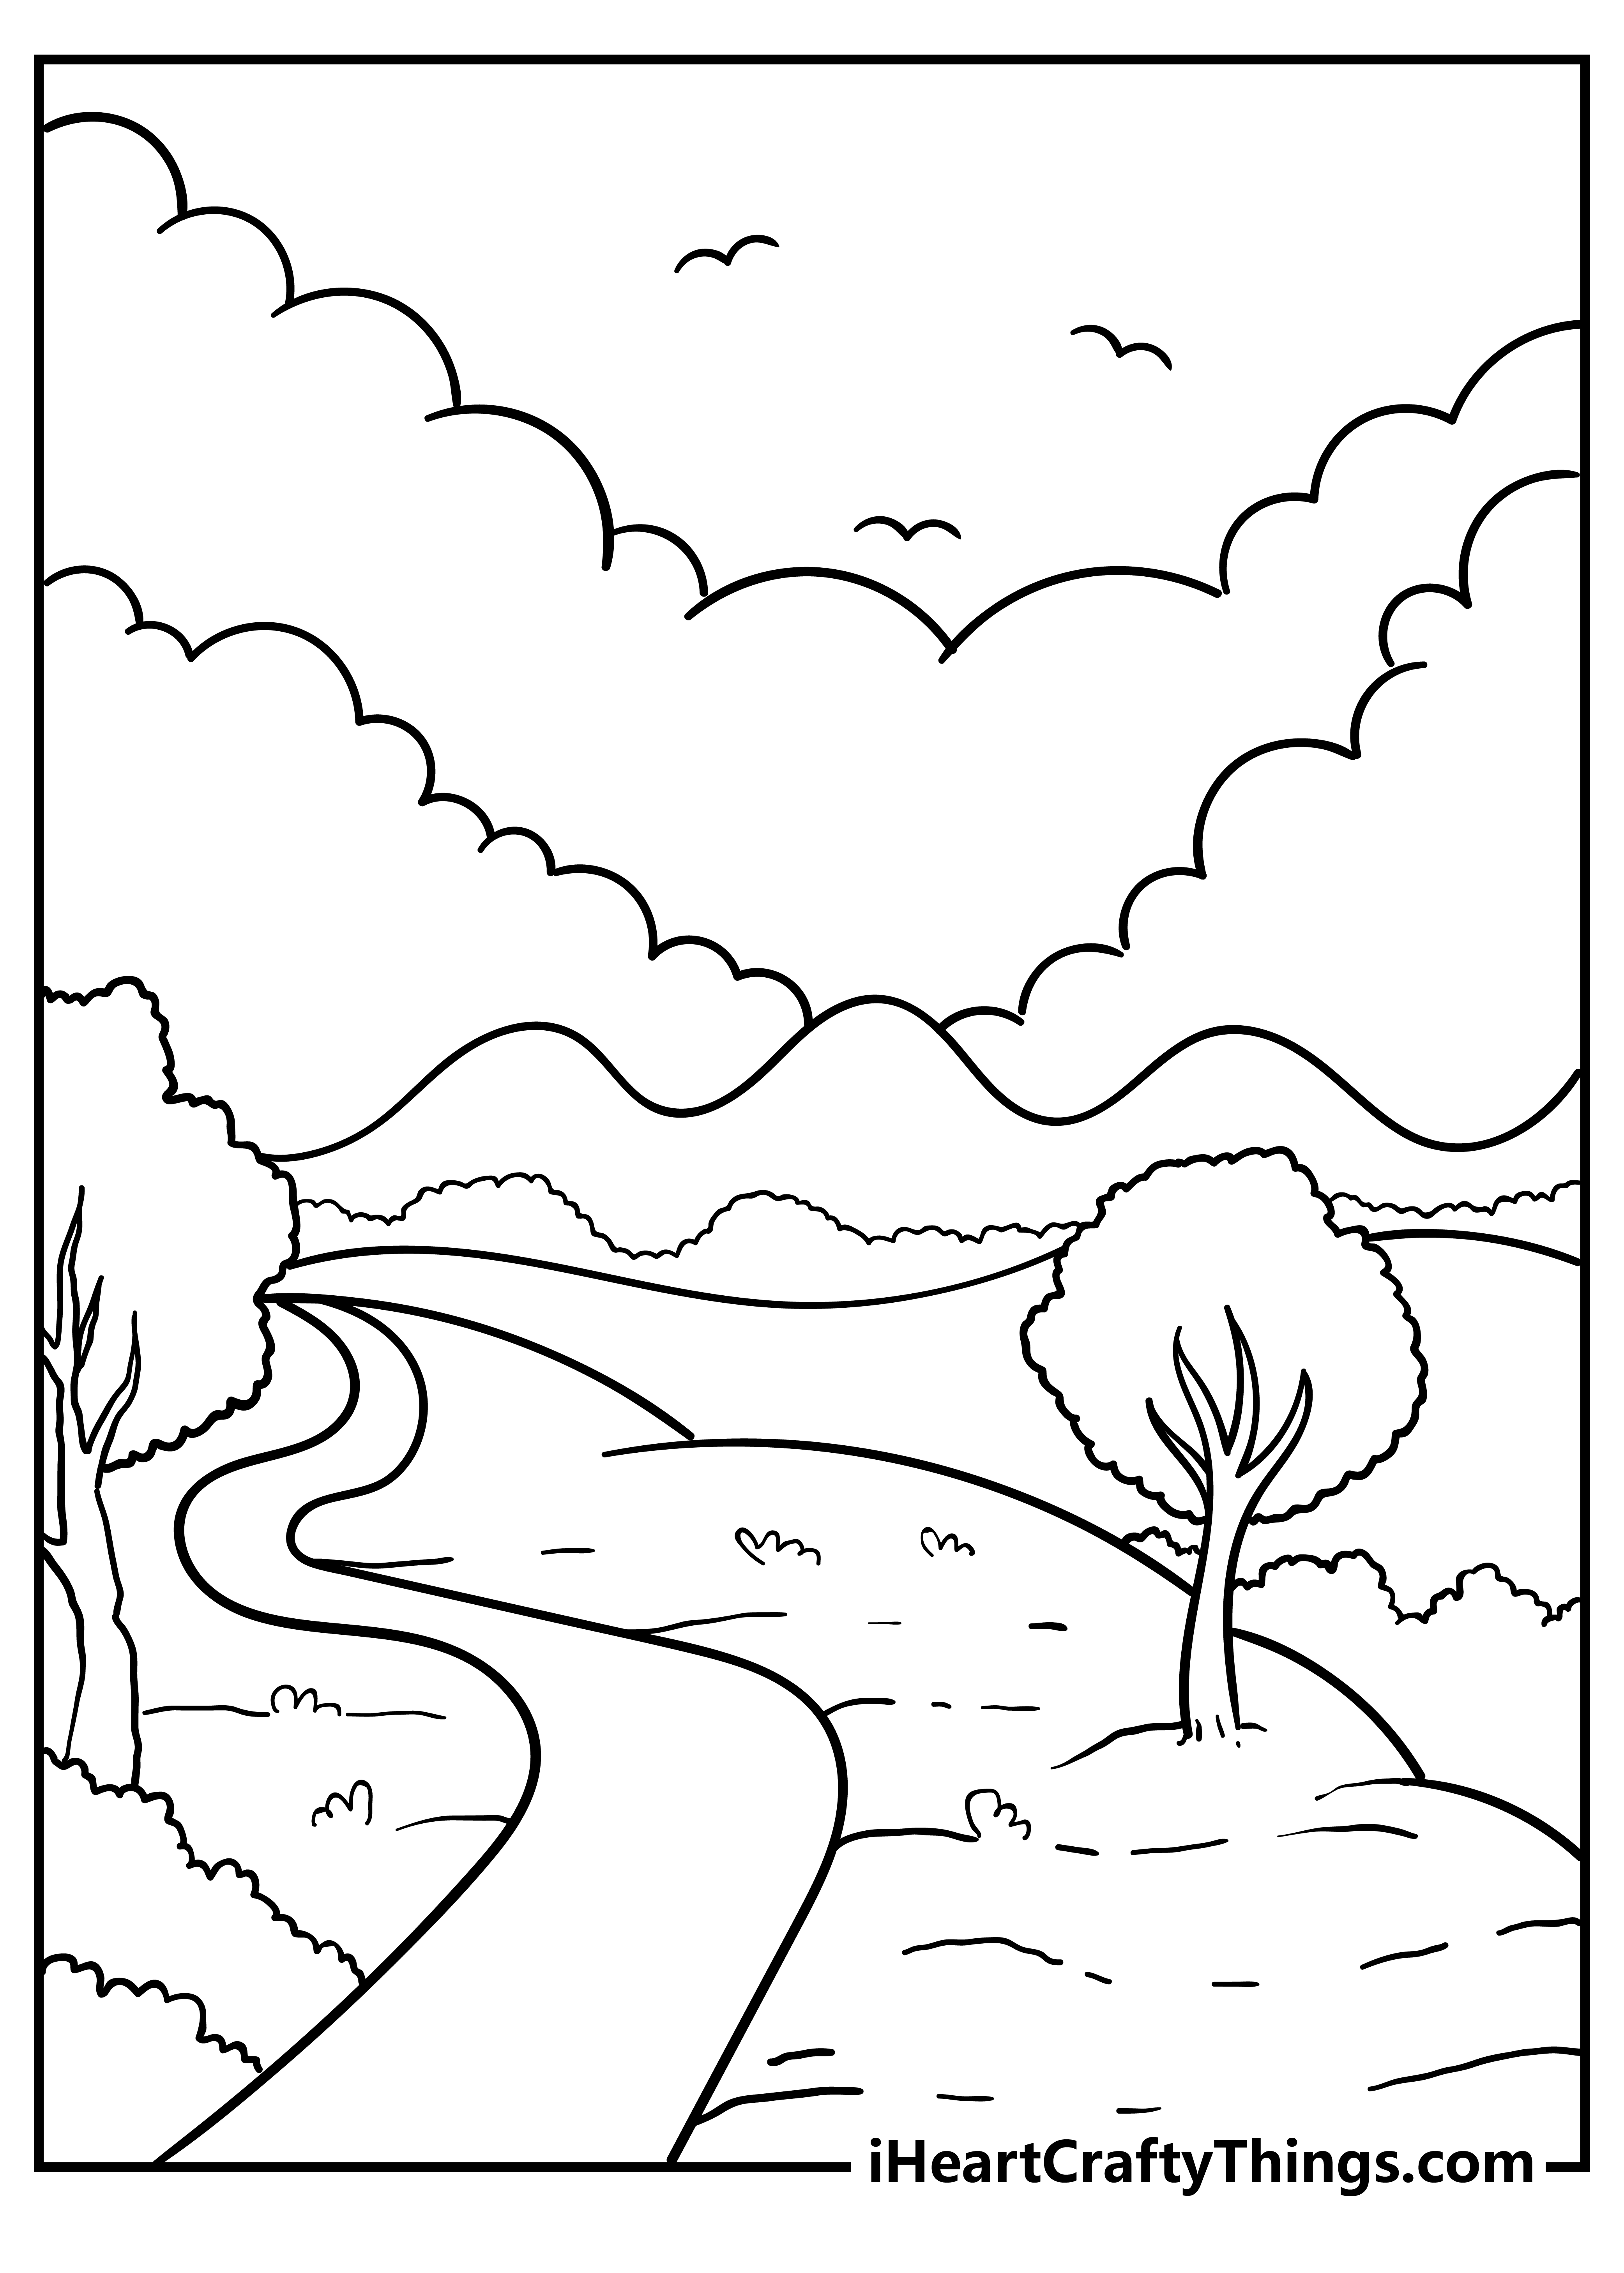 Nature coloring pages free printables